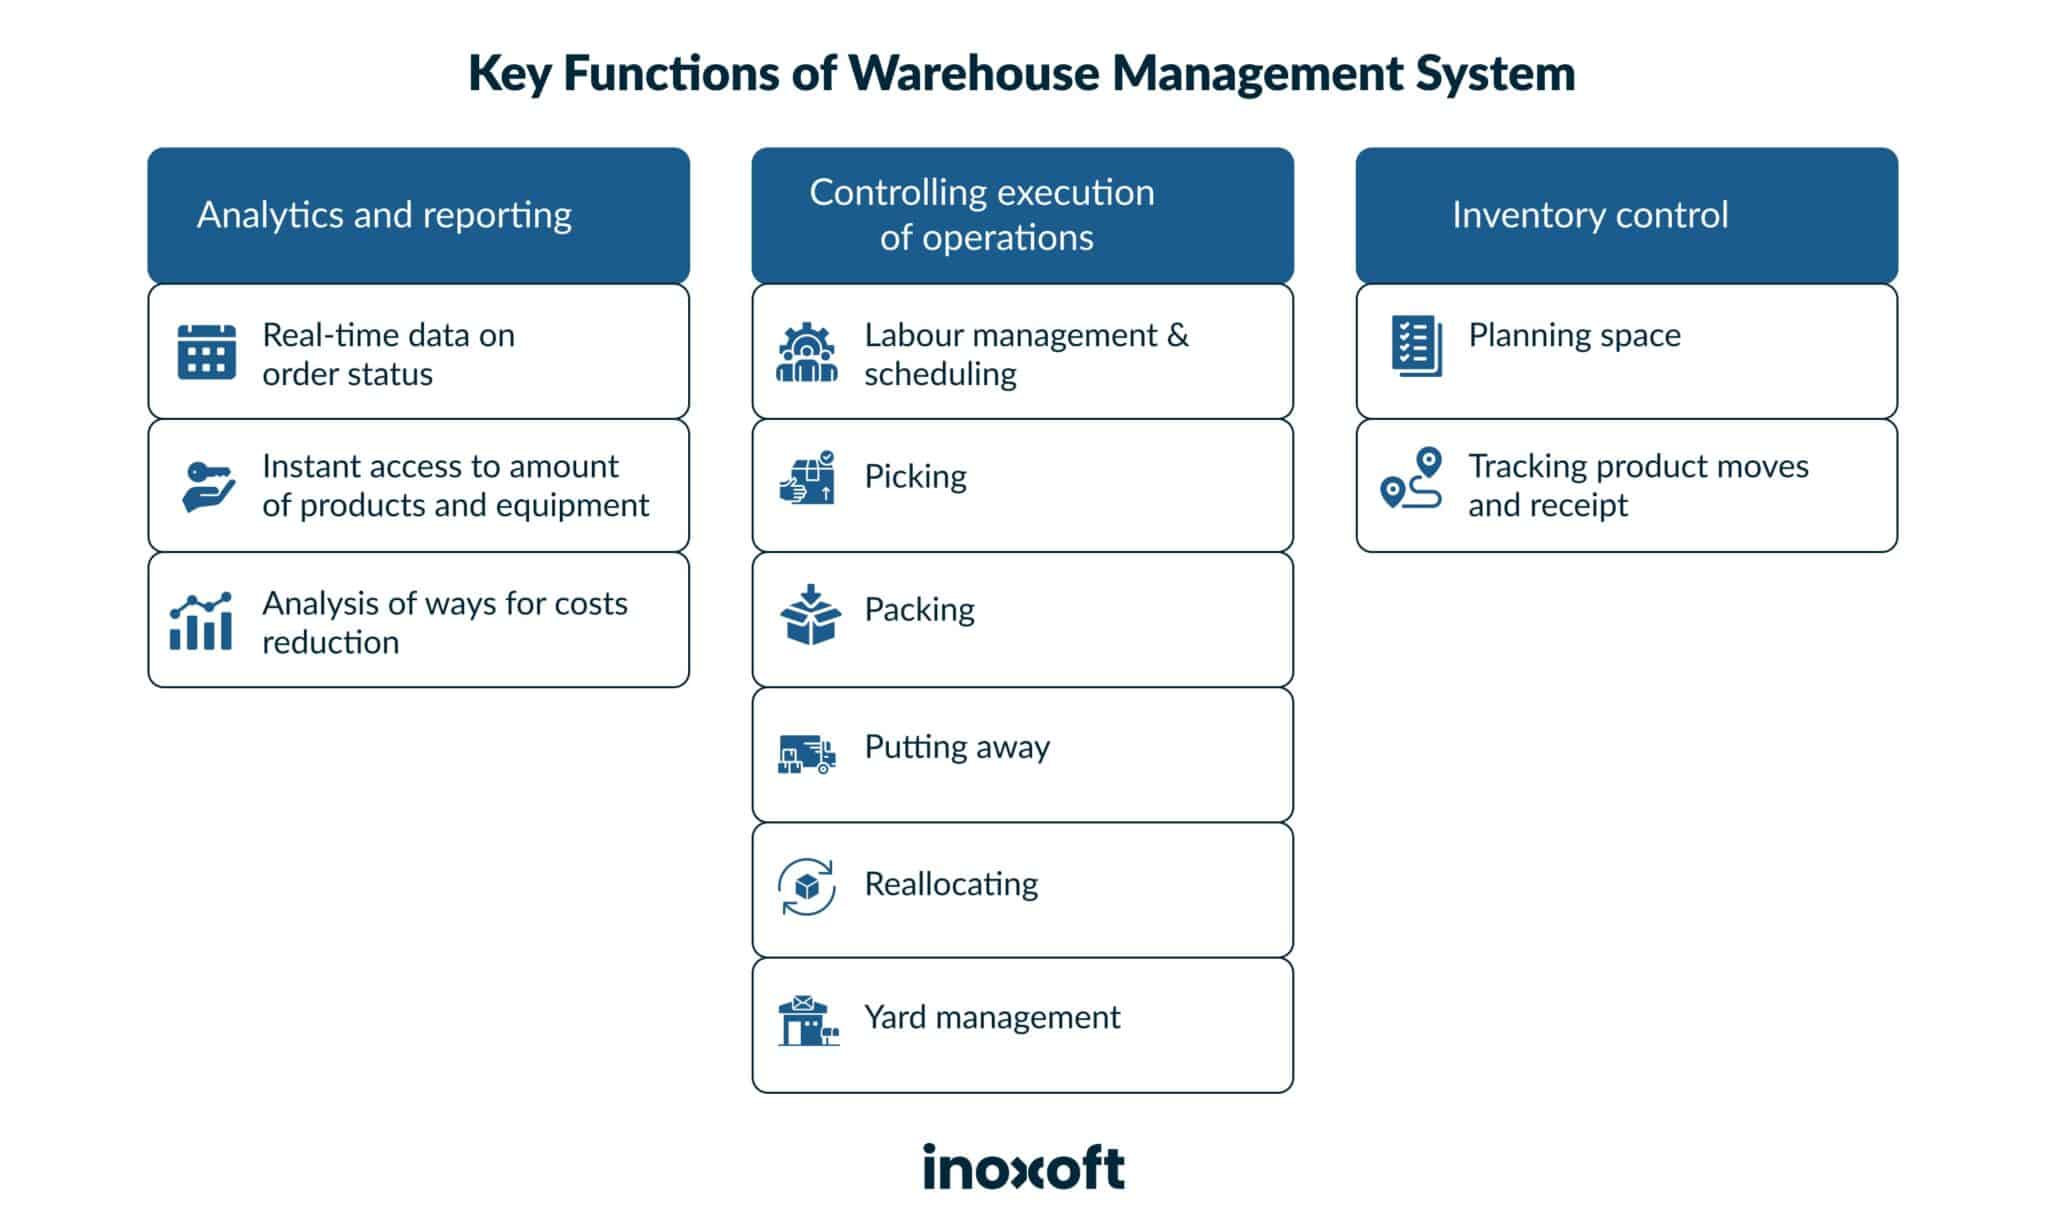 Key functions of warehouse management system